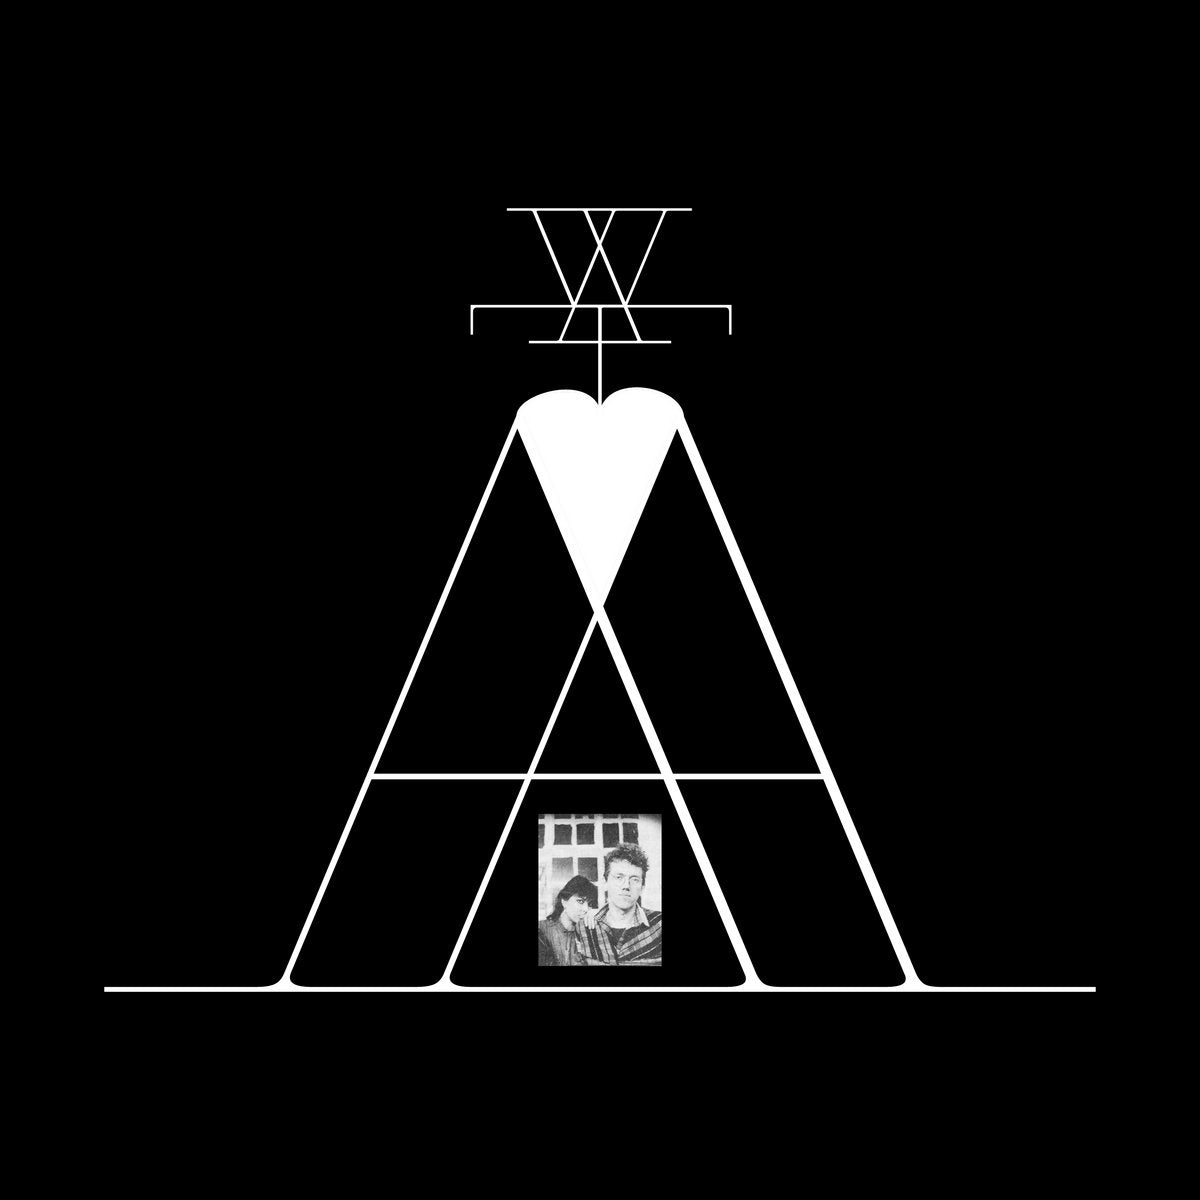 W.A.T. - A Letter To My Love